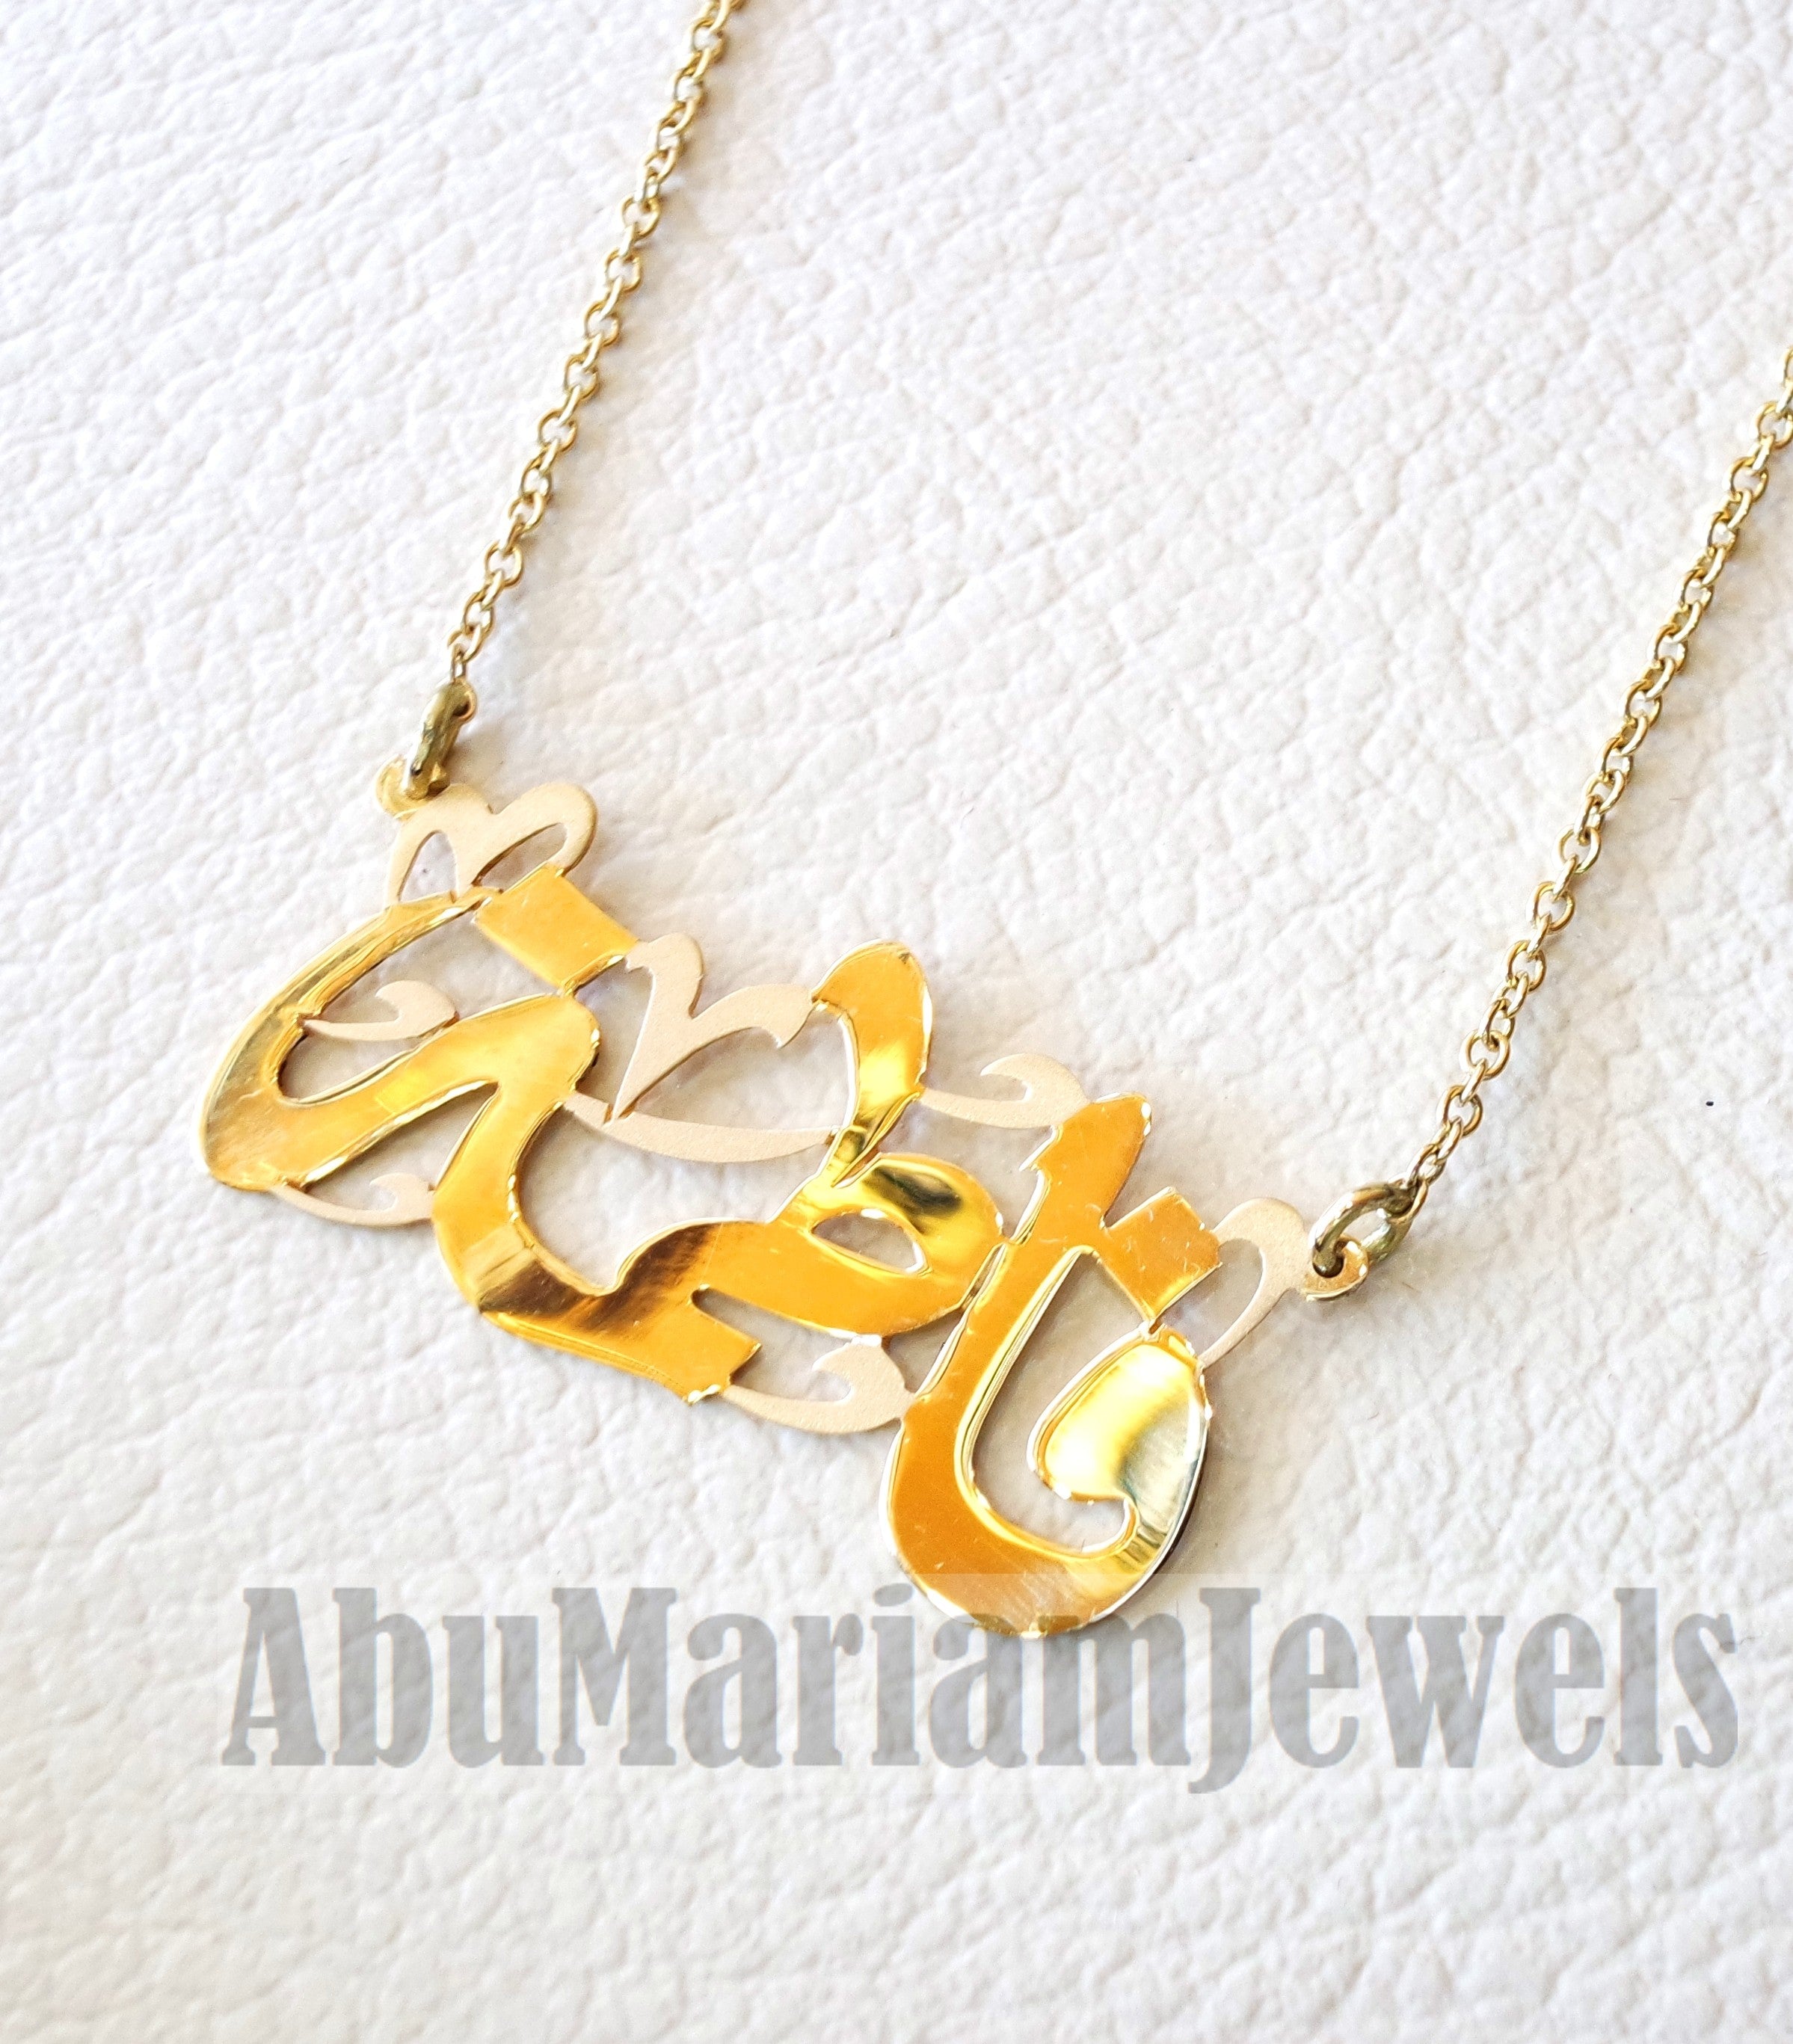 personalized customized 1 name 18 k gold arabic calligraphy pendant with chain standard , pear , rectangular or any shape fine jewelry N1007